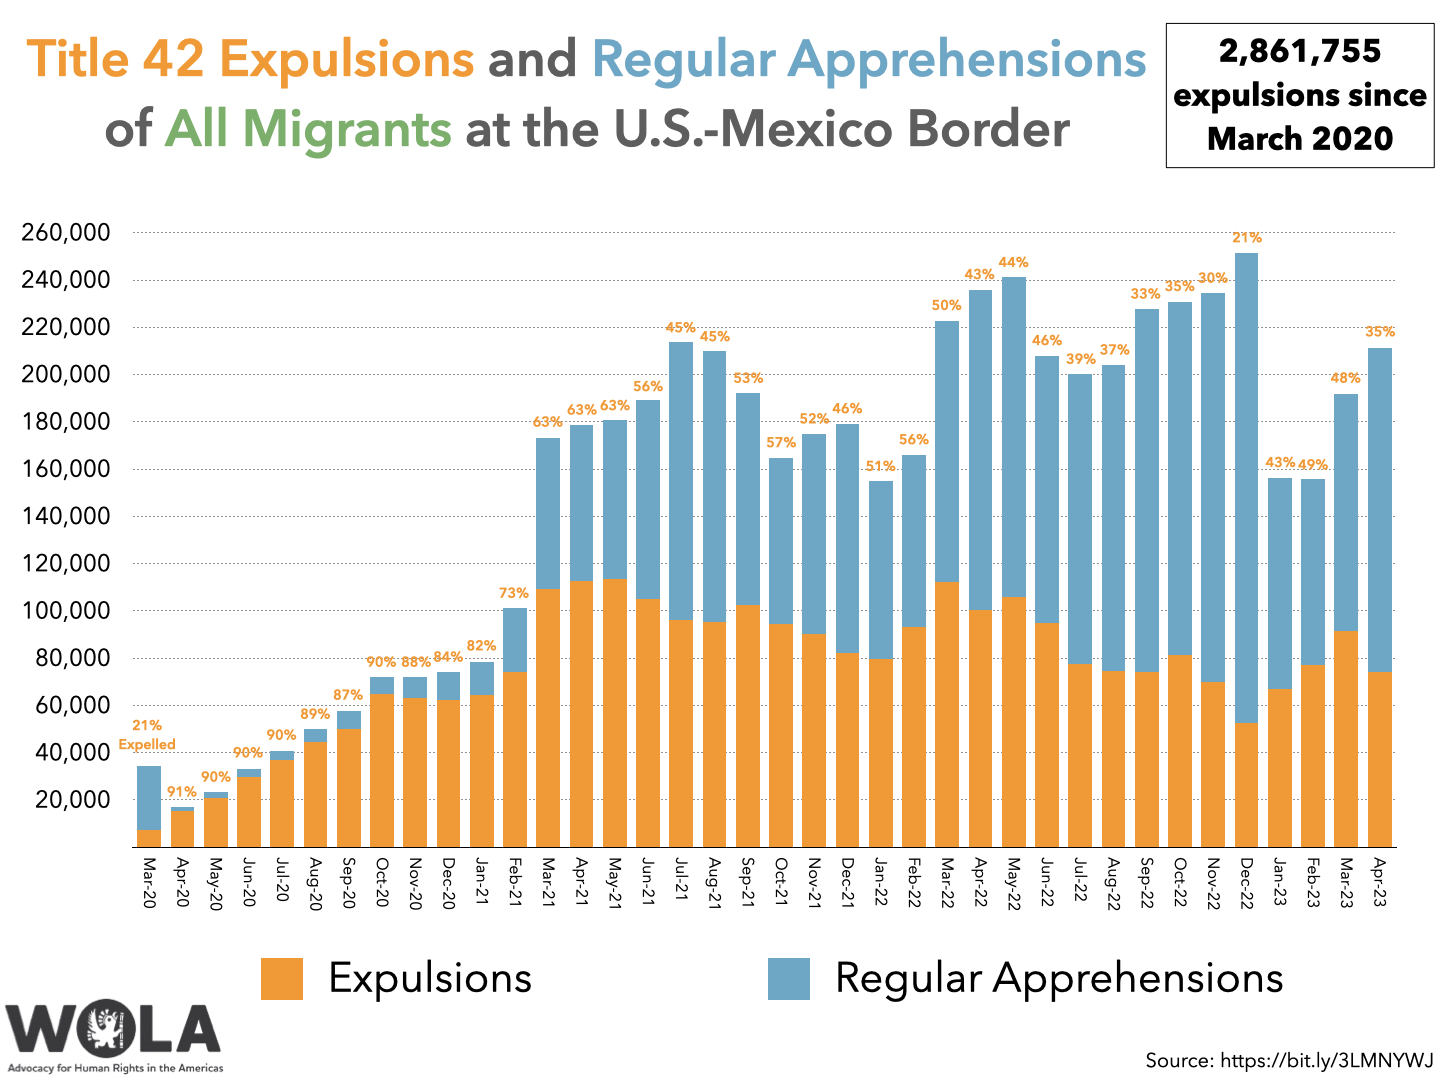 Title 42 Expulsions and Regular Apprehensions of All Migrants at the U